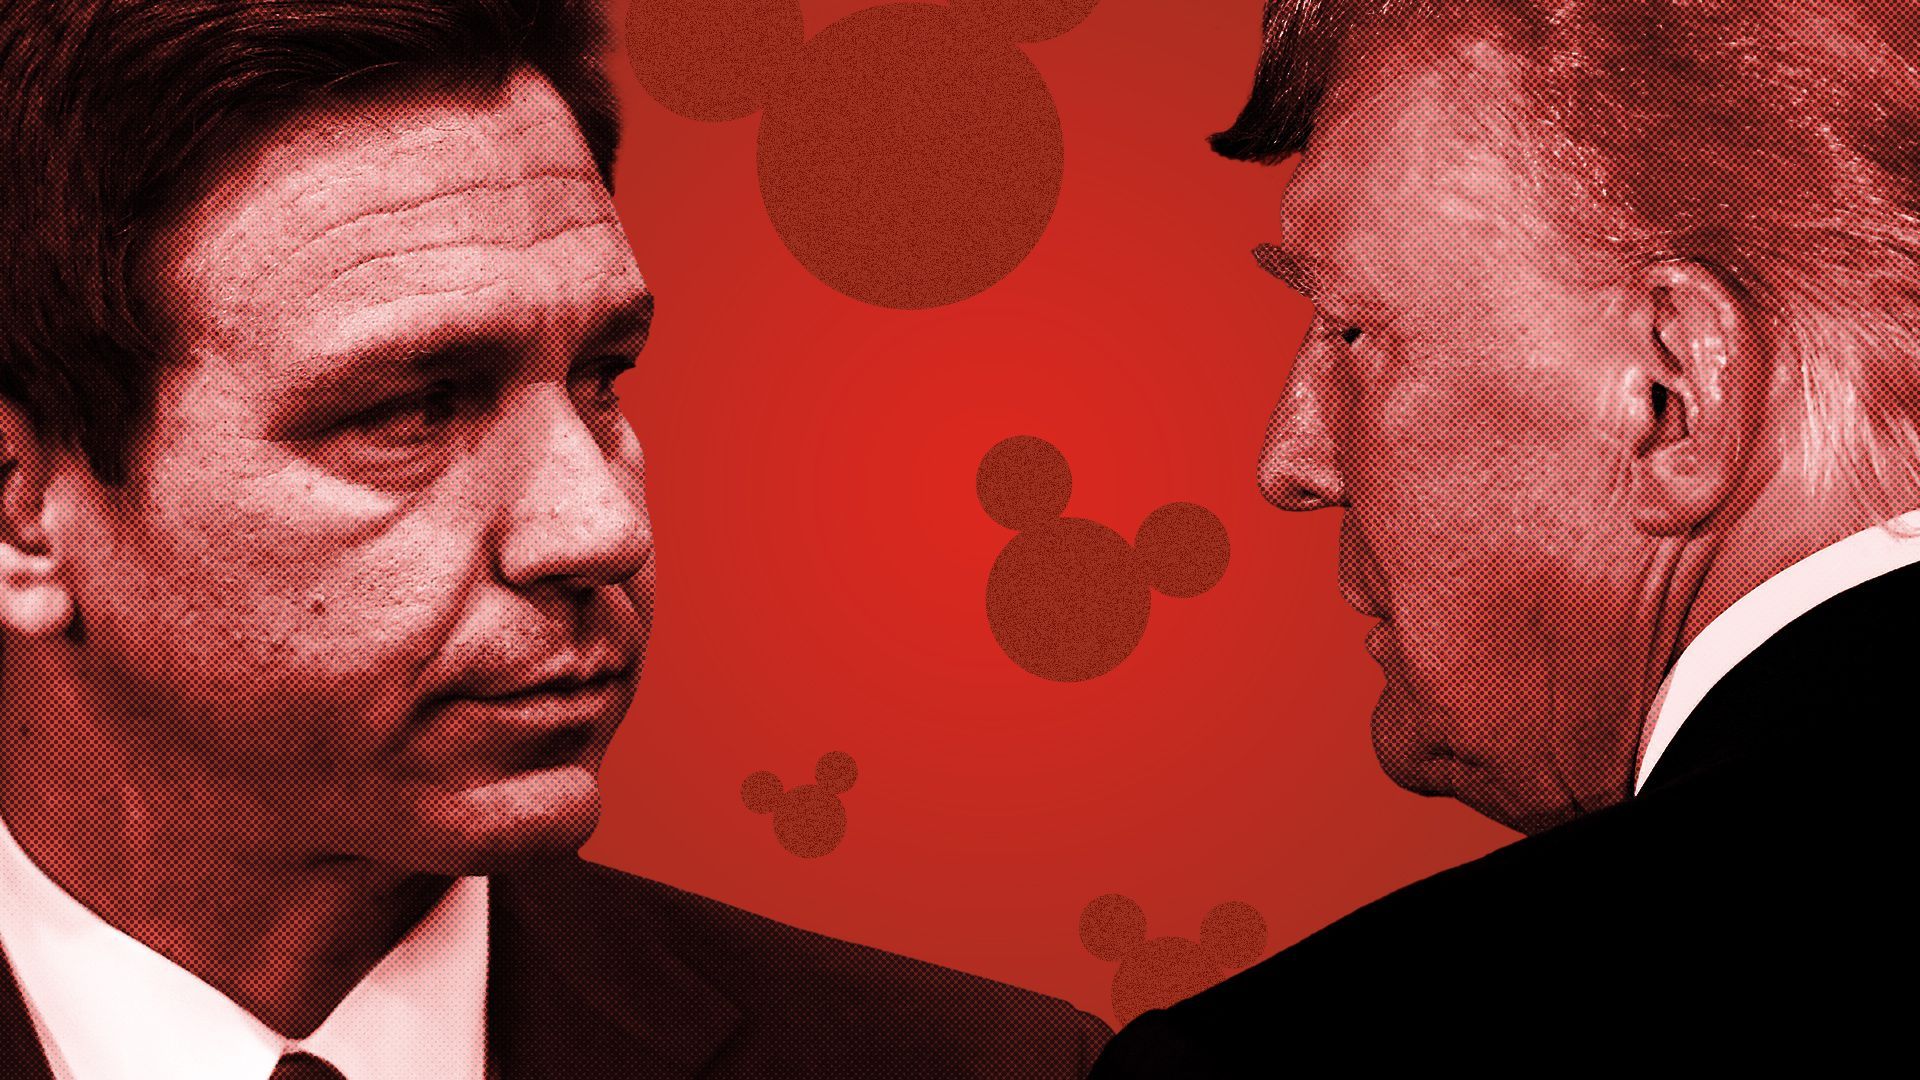 Photo illustration of Donald Trump and Ron DeSantis surrounded by Disney mouse shapes.